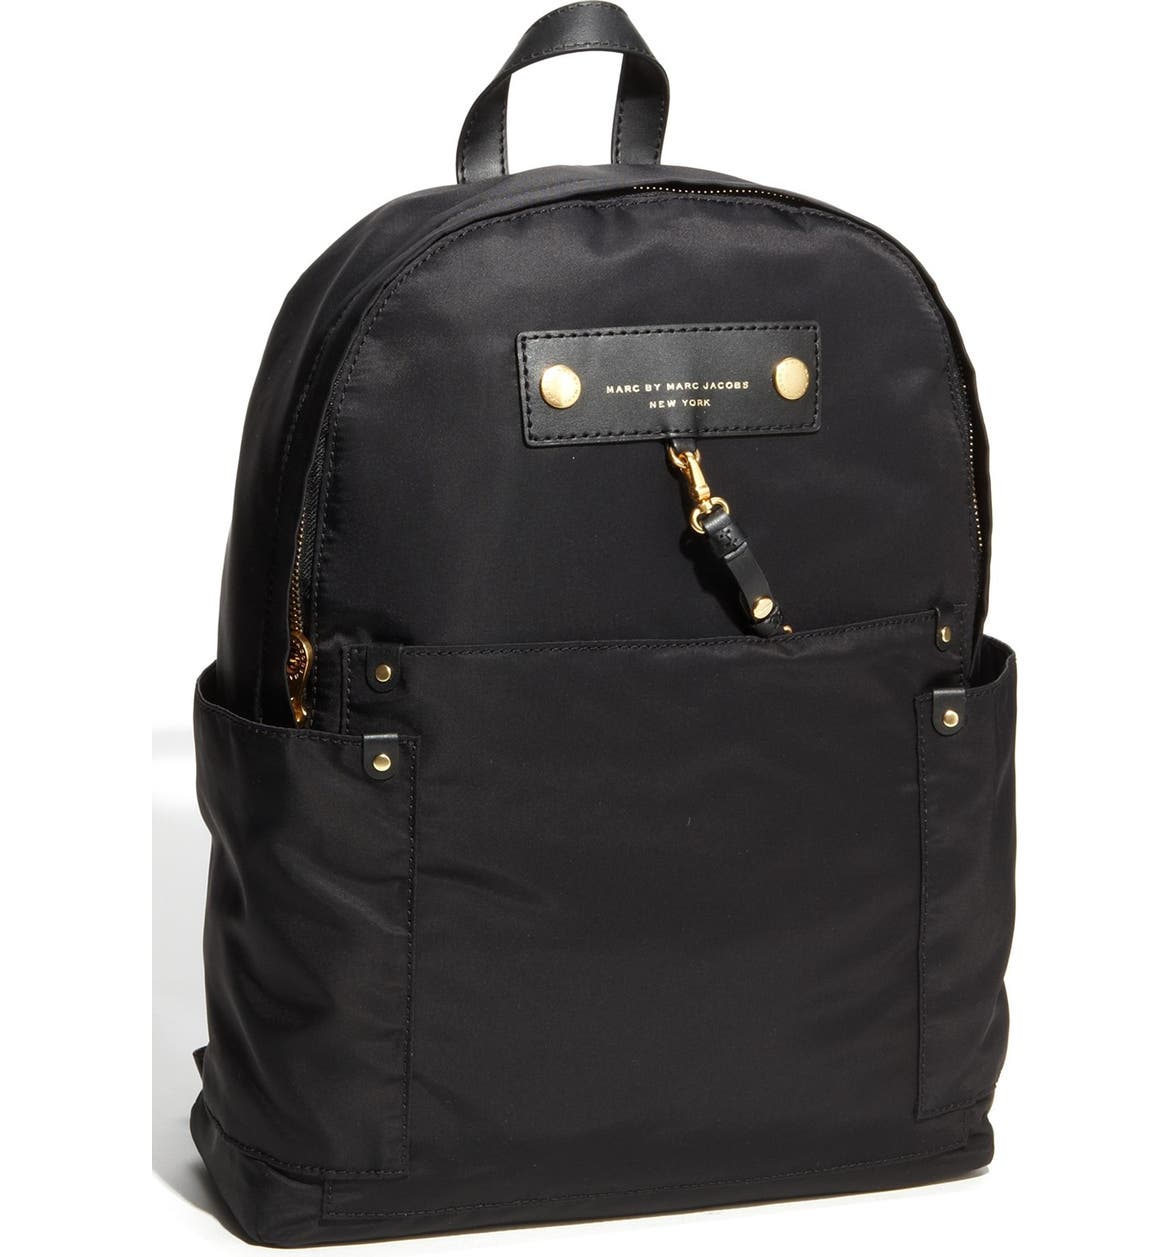 MARC BY MARC JACOBS 'Preppy Nylon' Backpack | Nordstrom